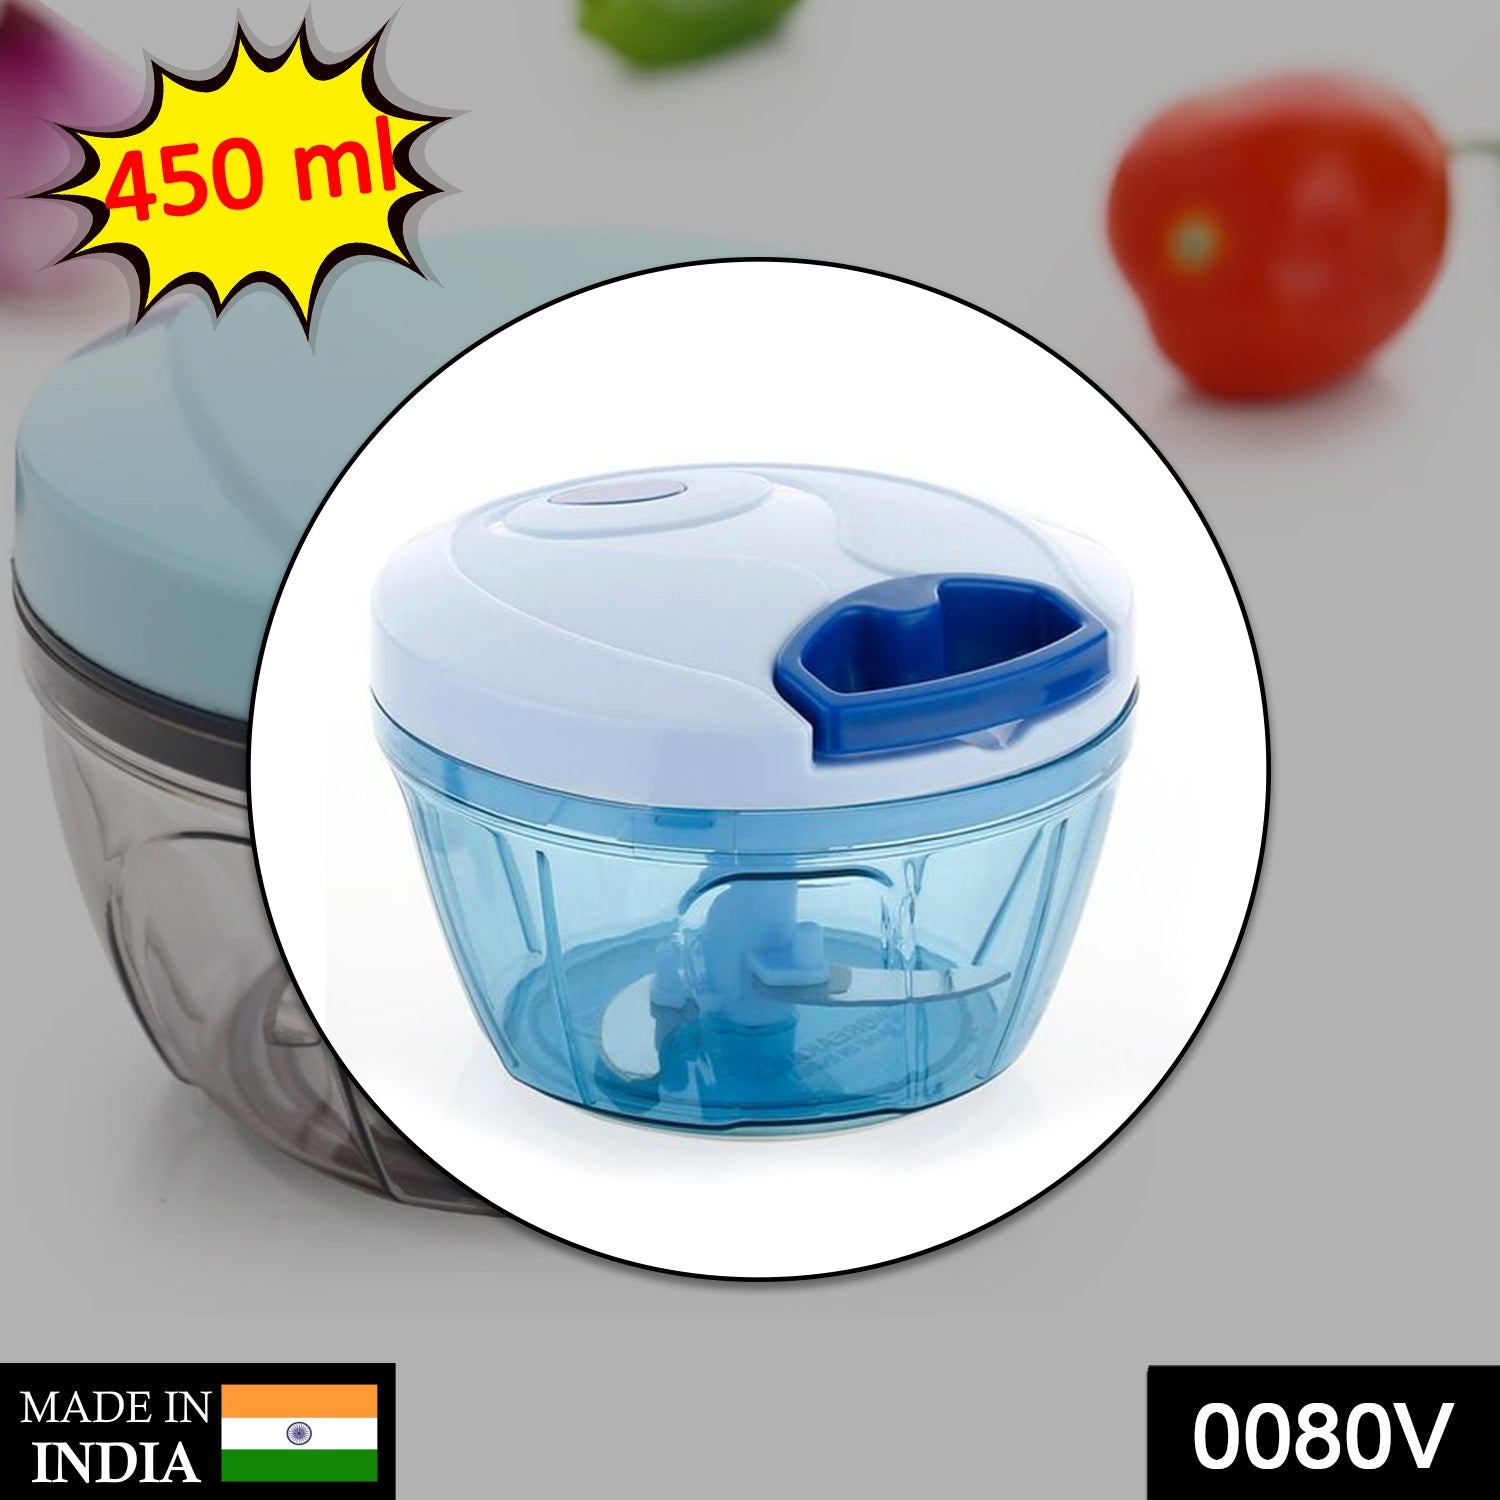 0080 V Atm Blue 450 ML Chopper widely used in all types of household kitchen purposes for chopping and cutting of various kinds of fruits and vegetables etc - DeoDap